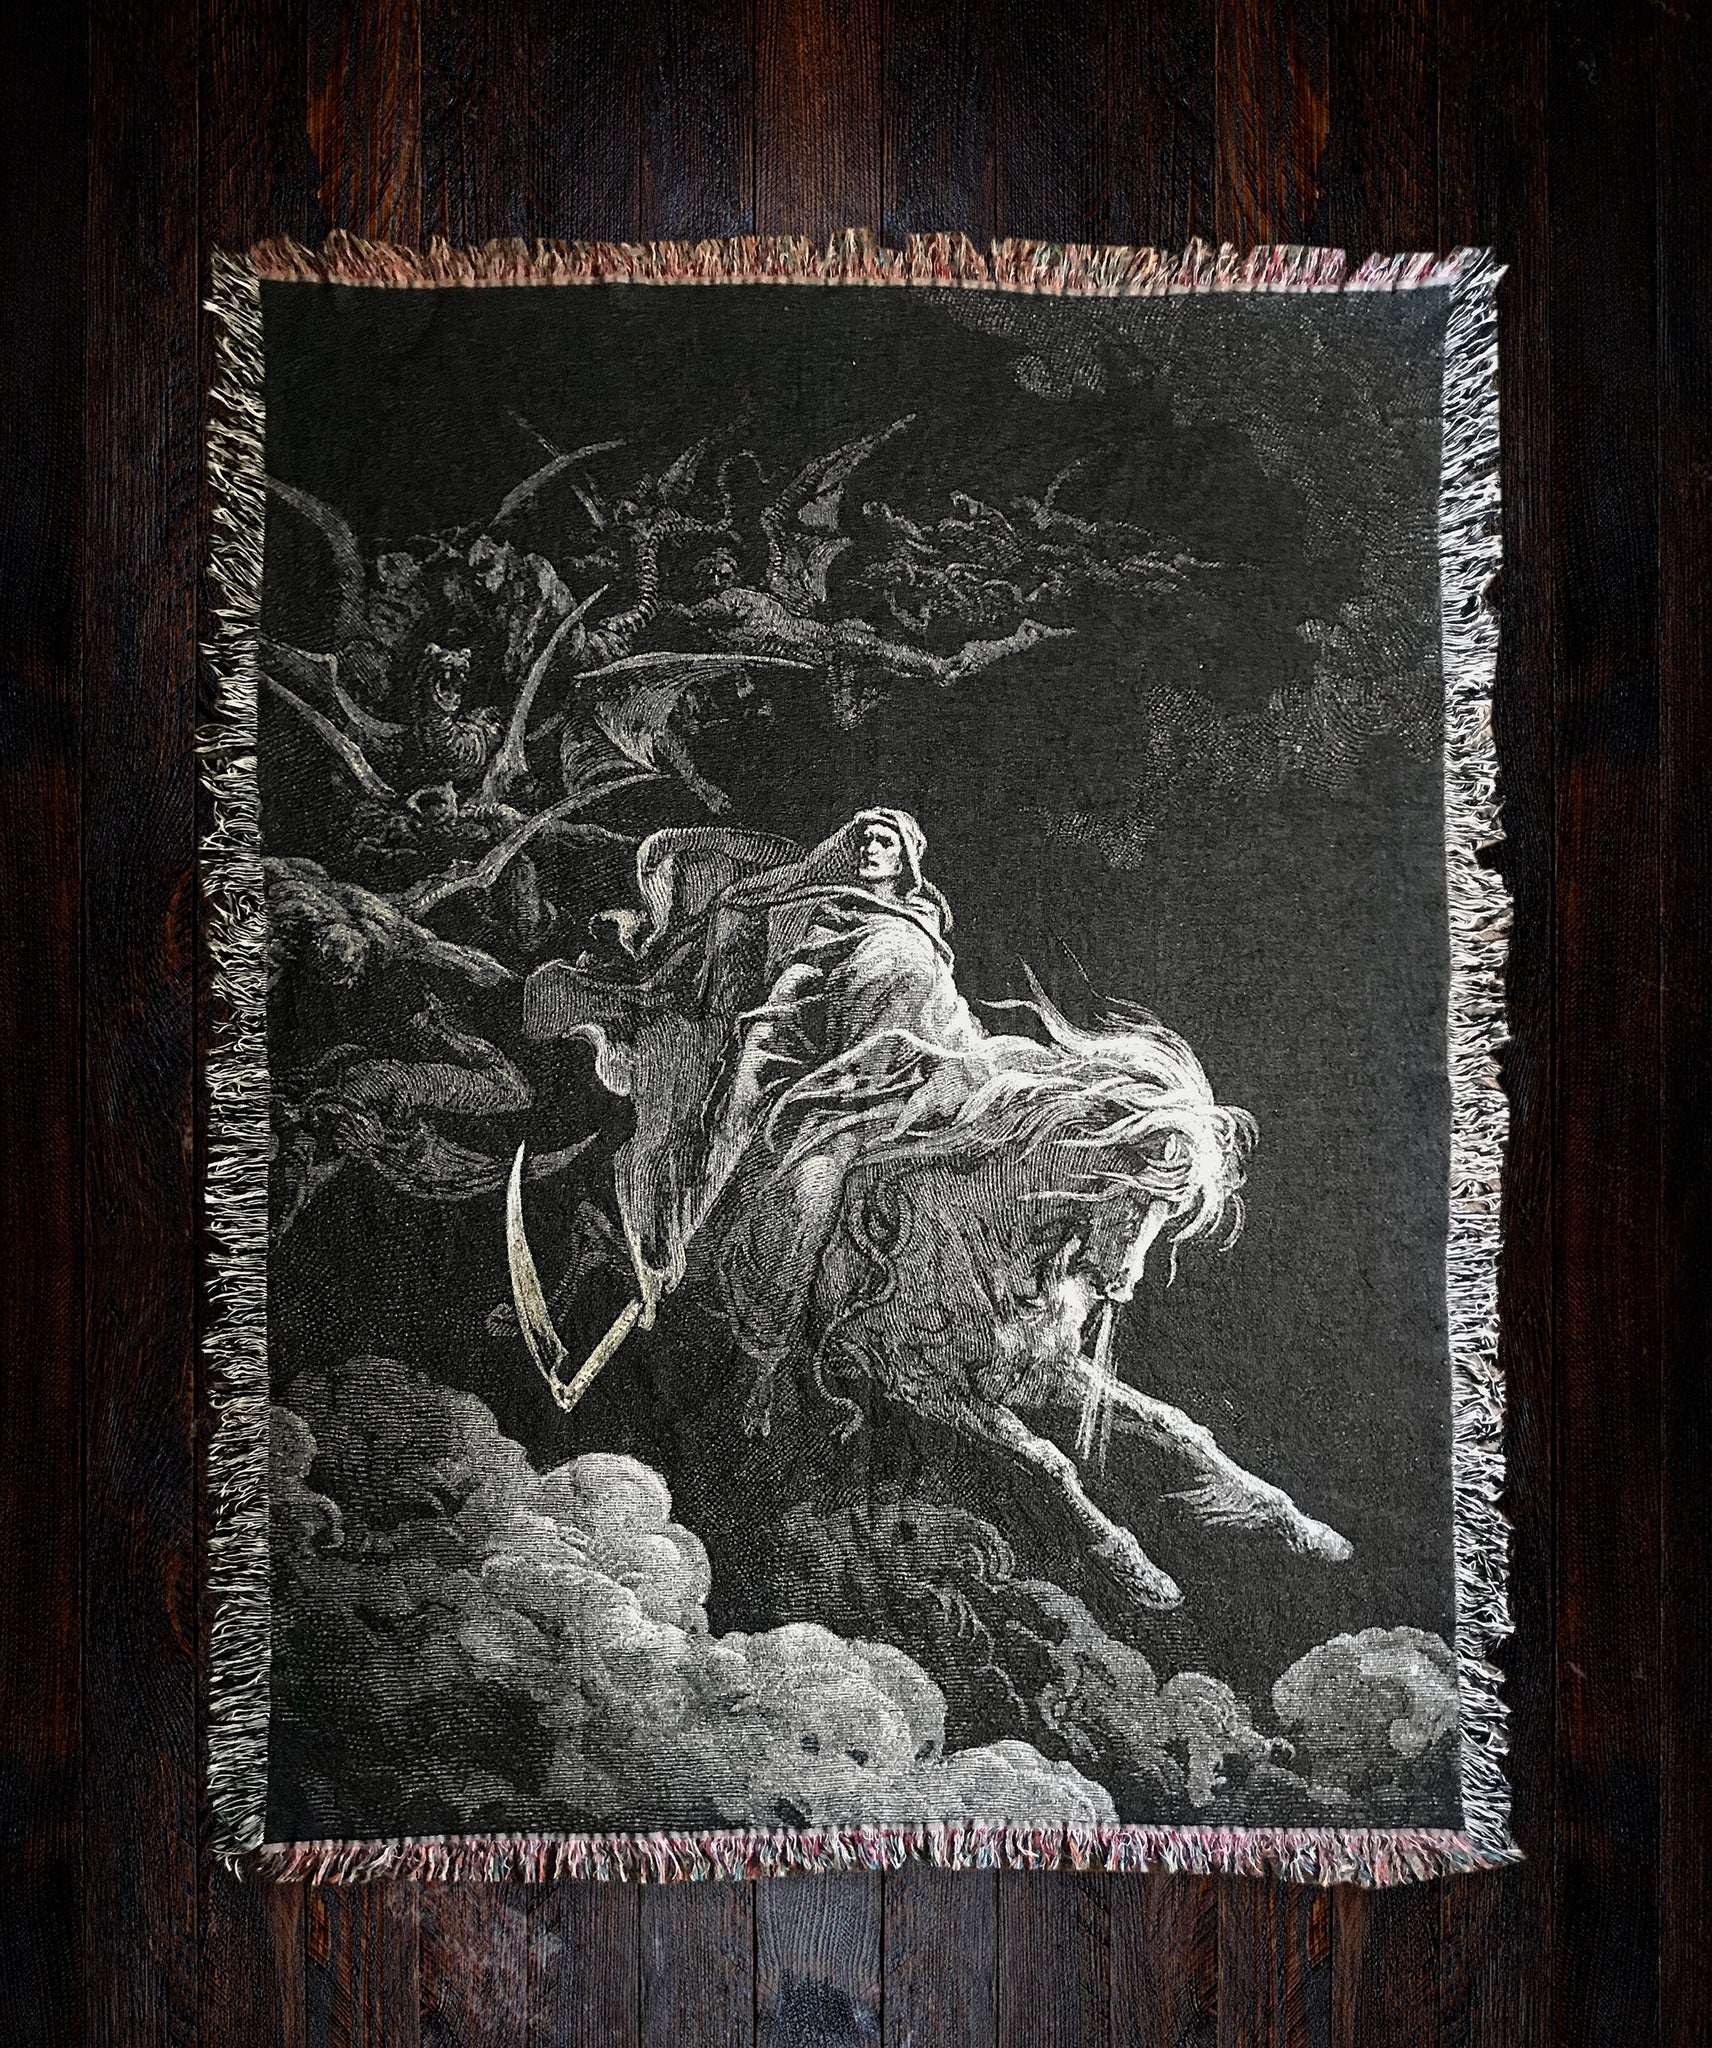 Fire & Sulphur: A Curated Collection of Gustave Doré – Dark Art and Craft